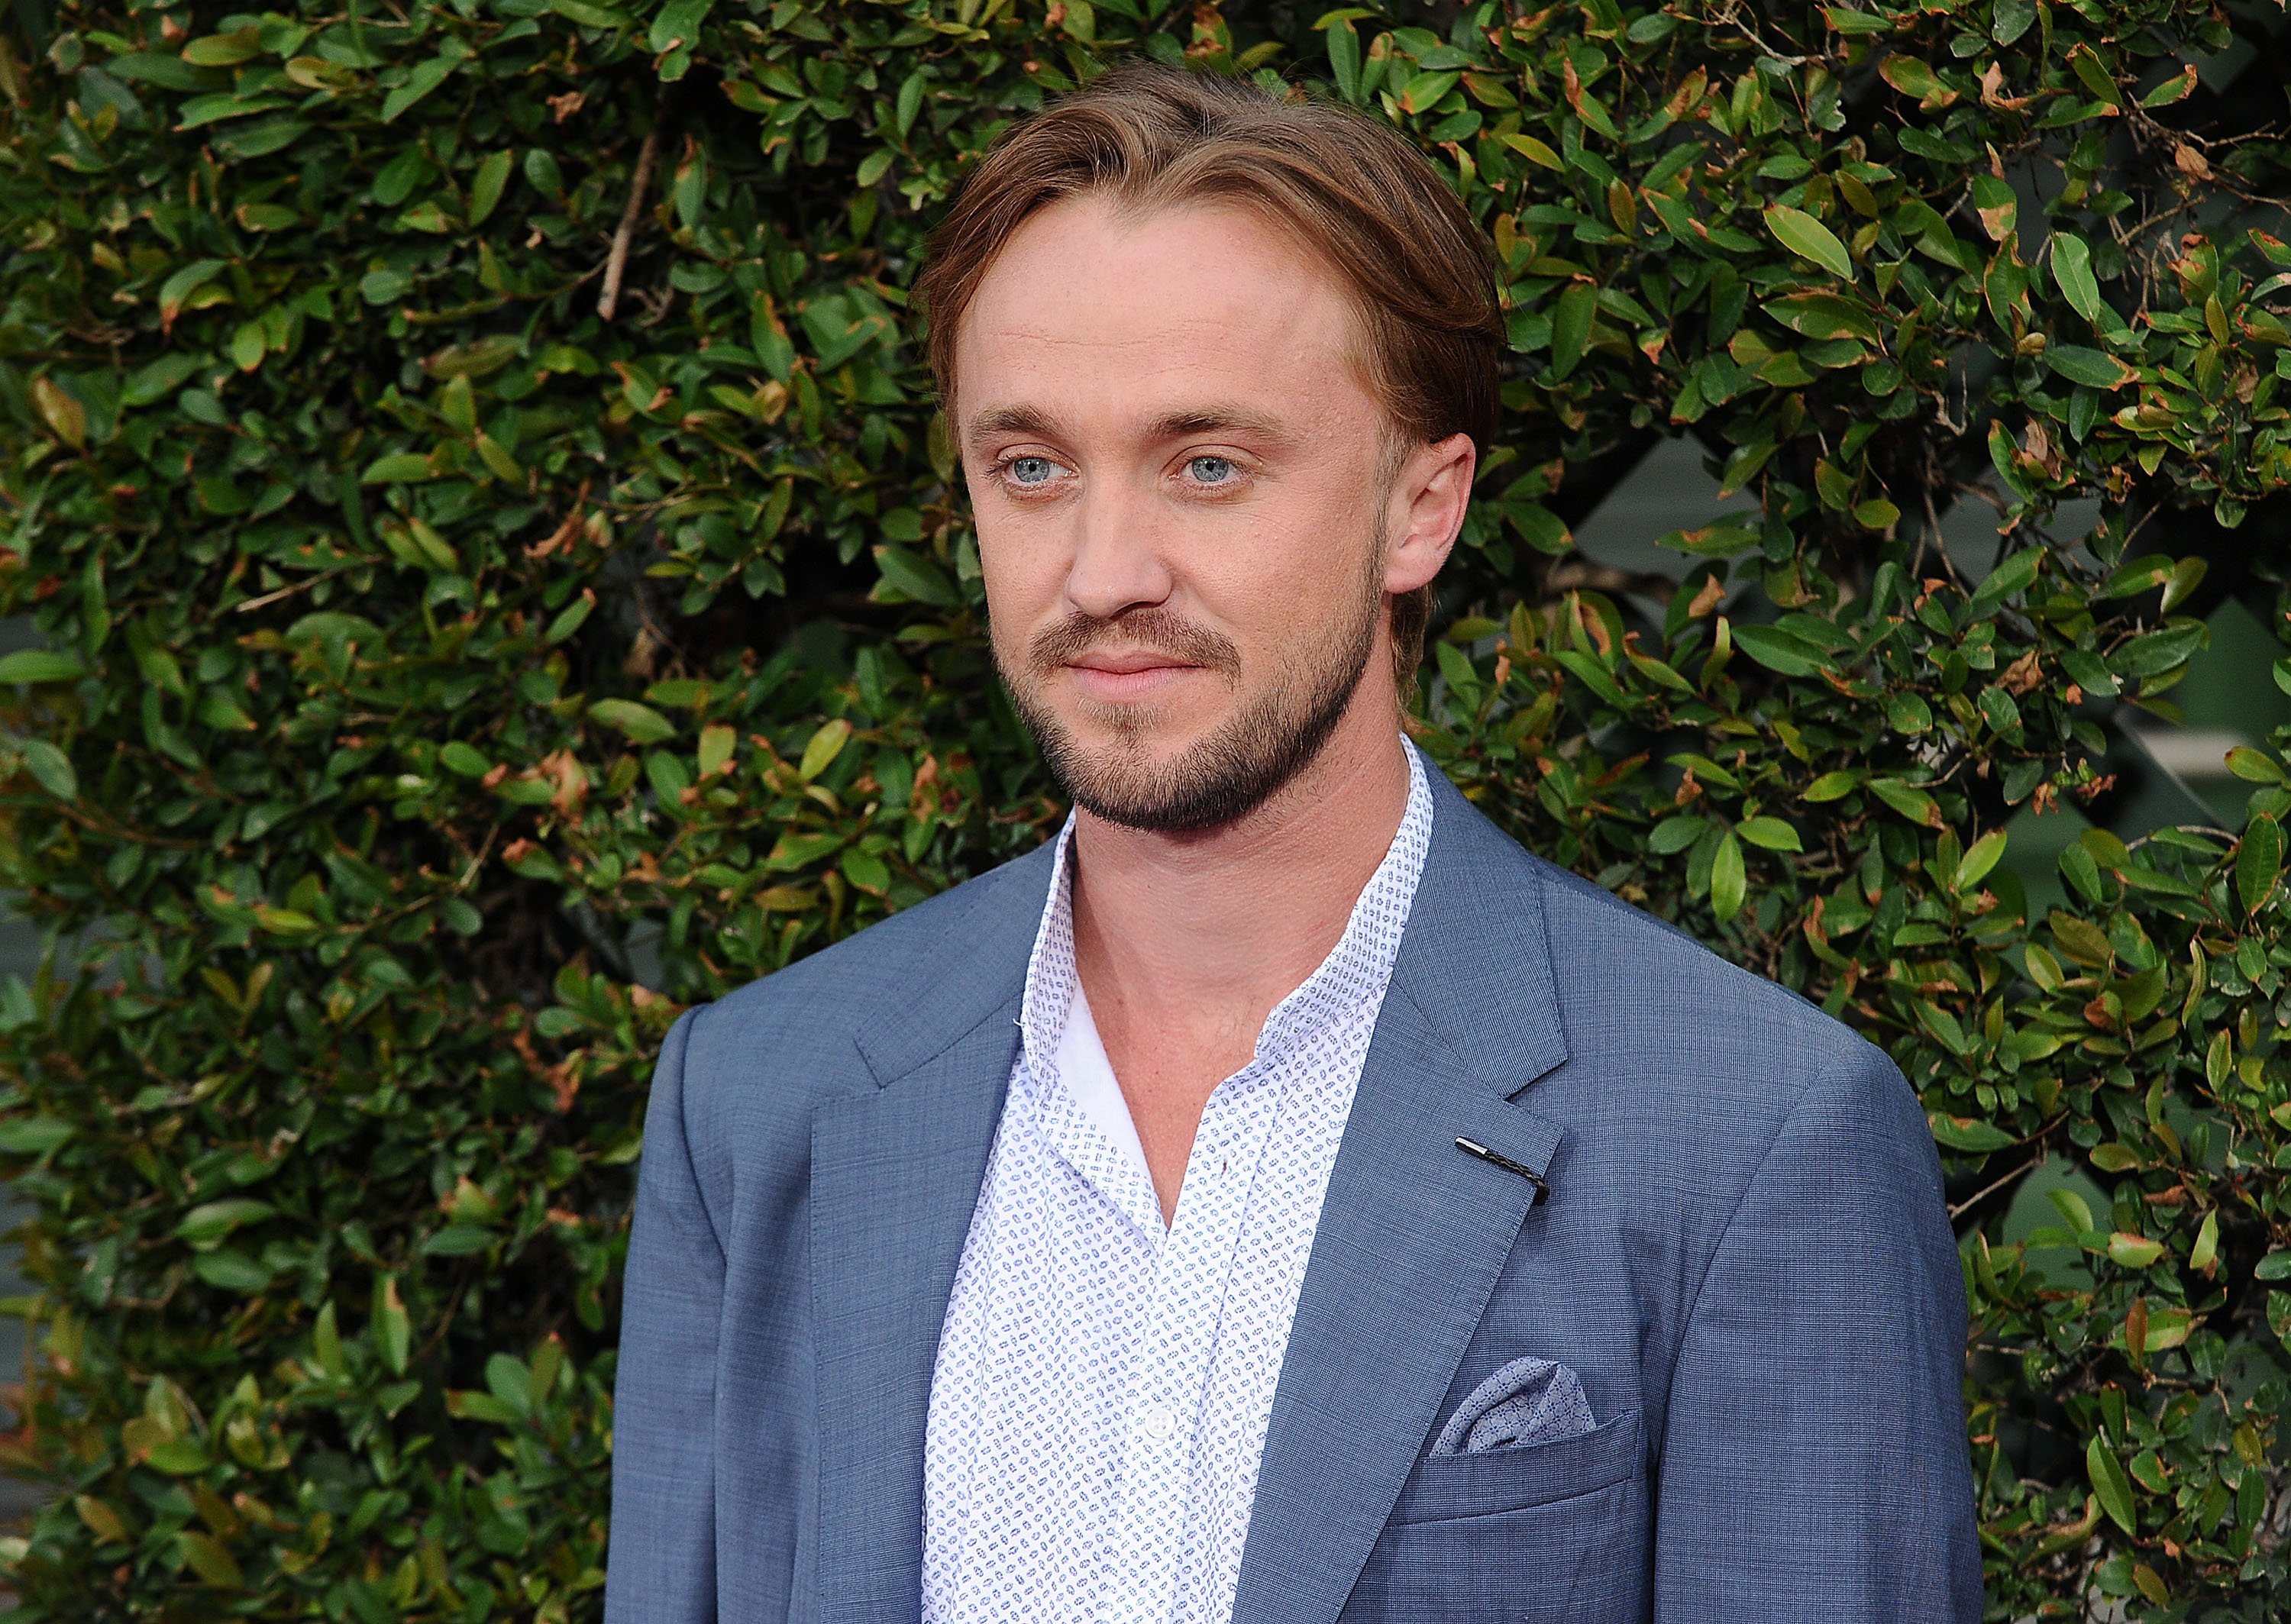 Tom Felton attends the opening of "The Wizarding World of Harry Potter" at Universal Studios Hollywood on April 5, 2016 in Universal City, California | Photo: Getty Images